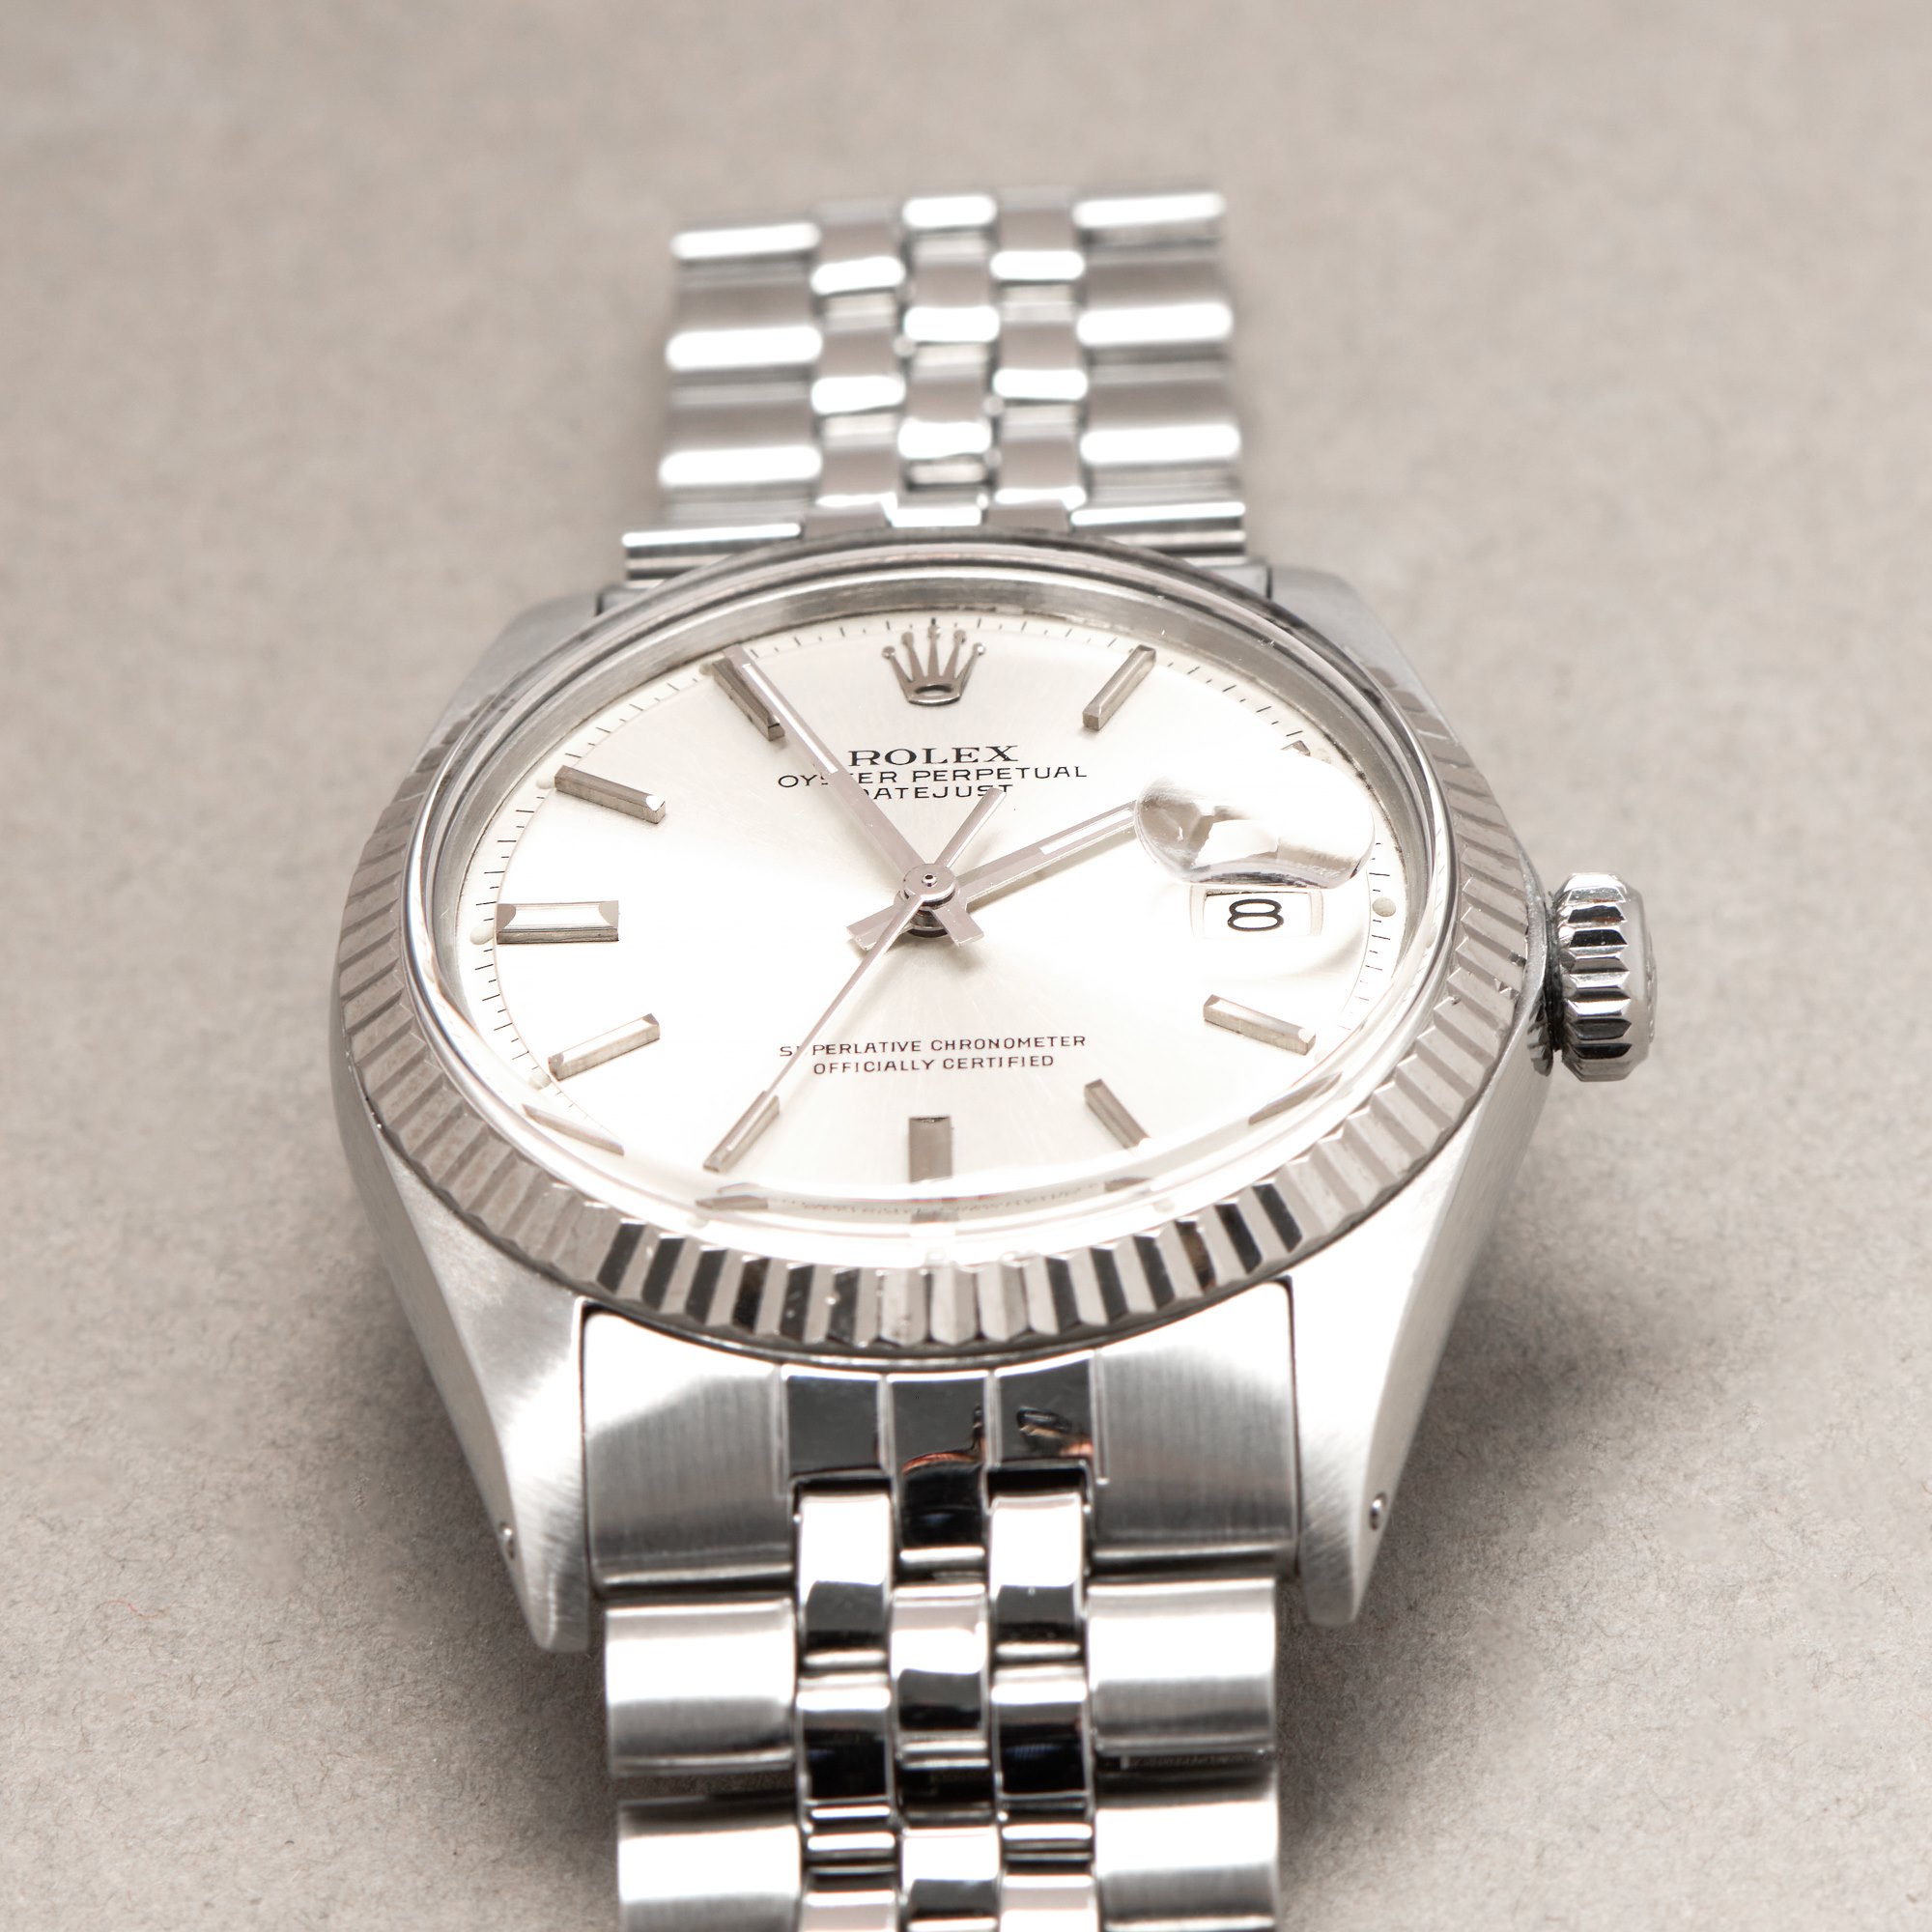 Rolex Datejust 36 18K White Gold & Stainless Steel Watch 1603 - Image 6 of 8